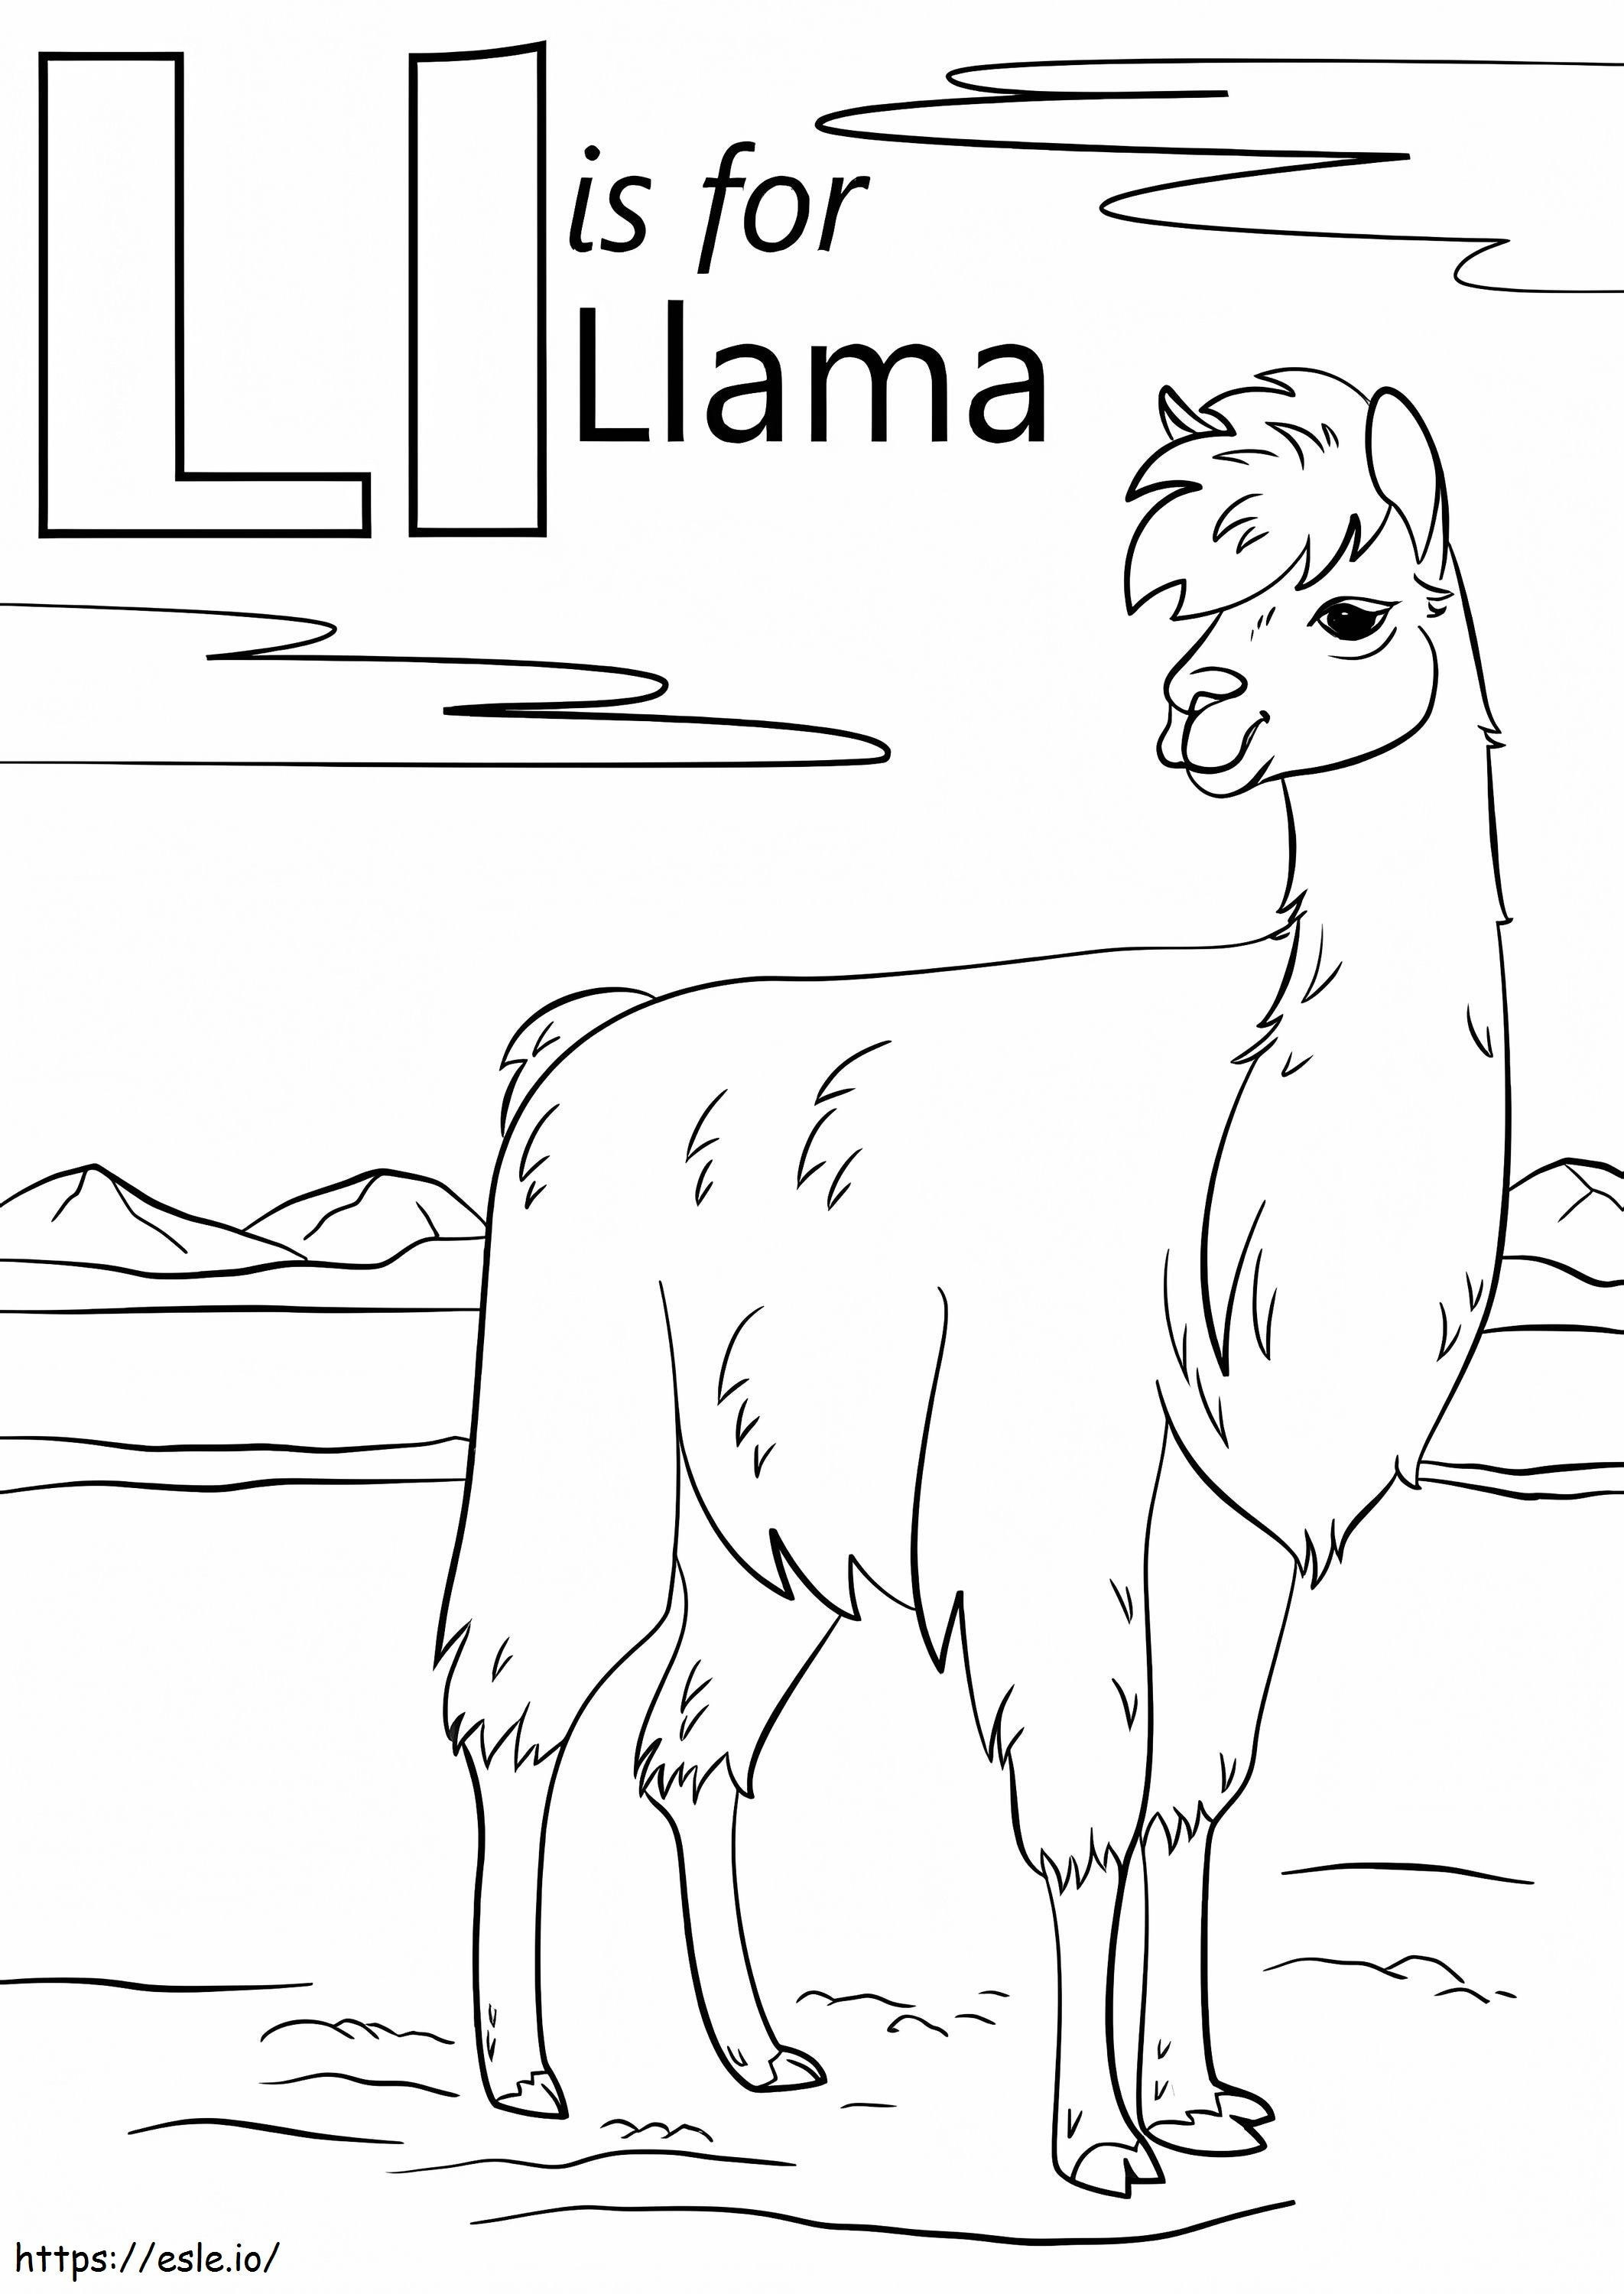 Called Letter L coloring page